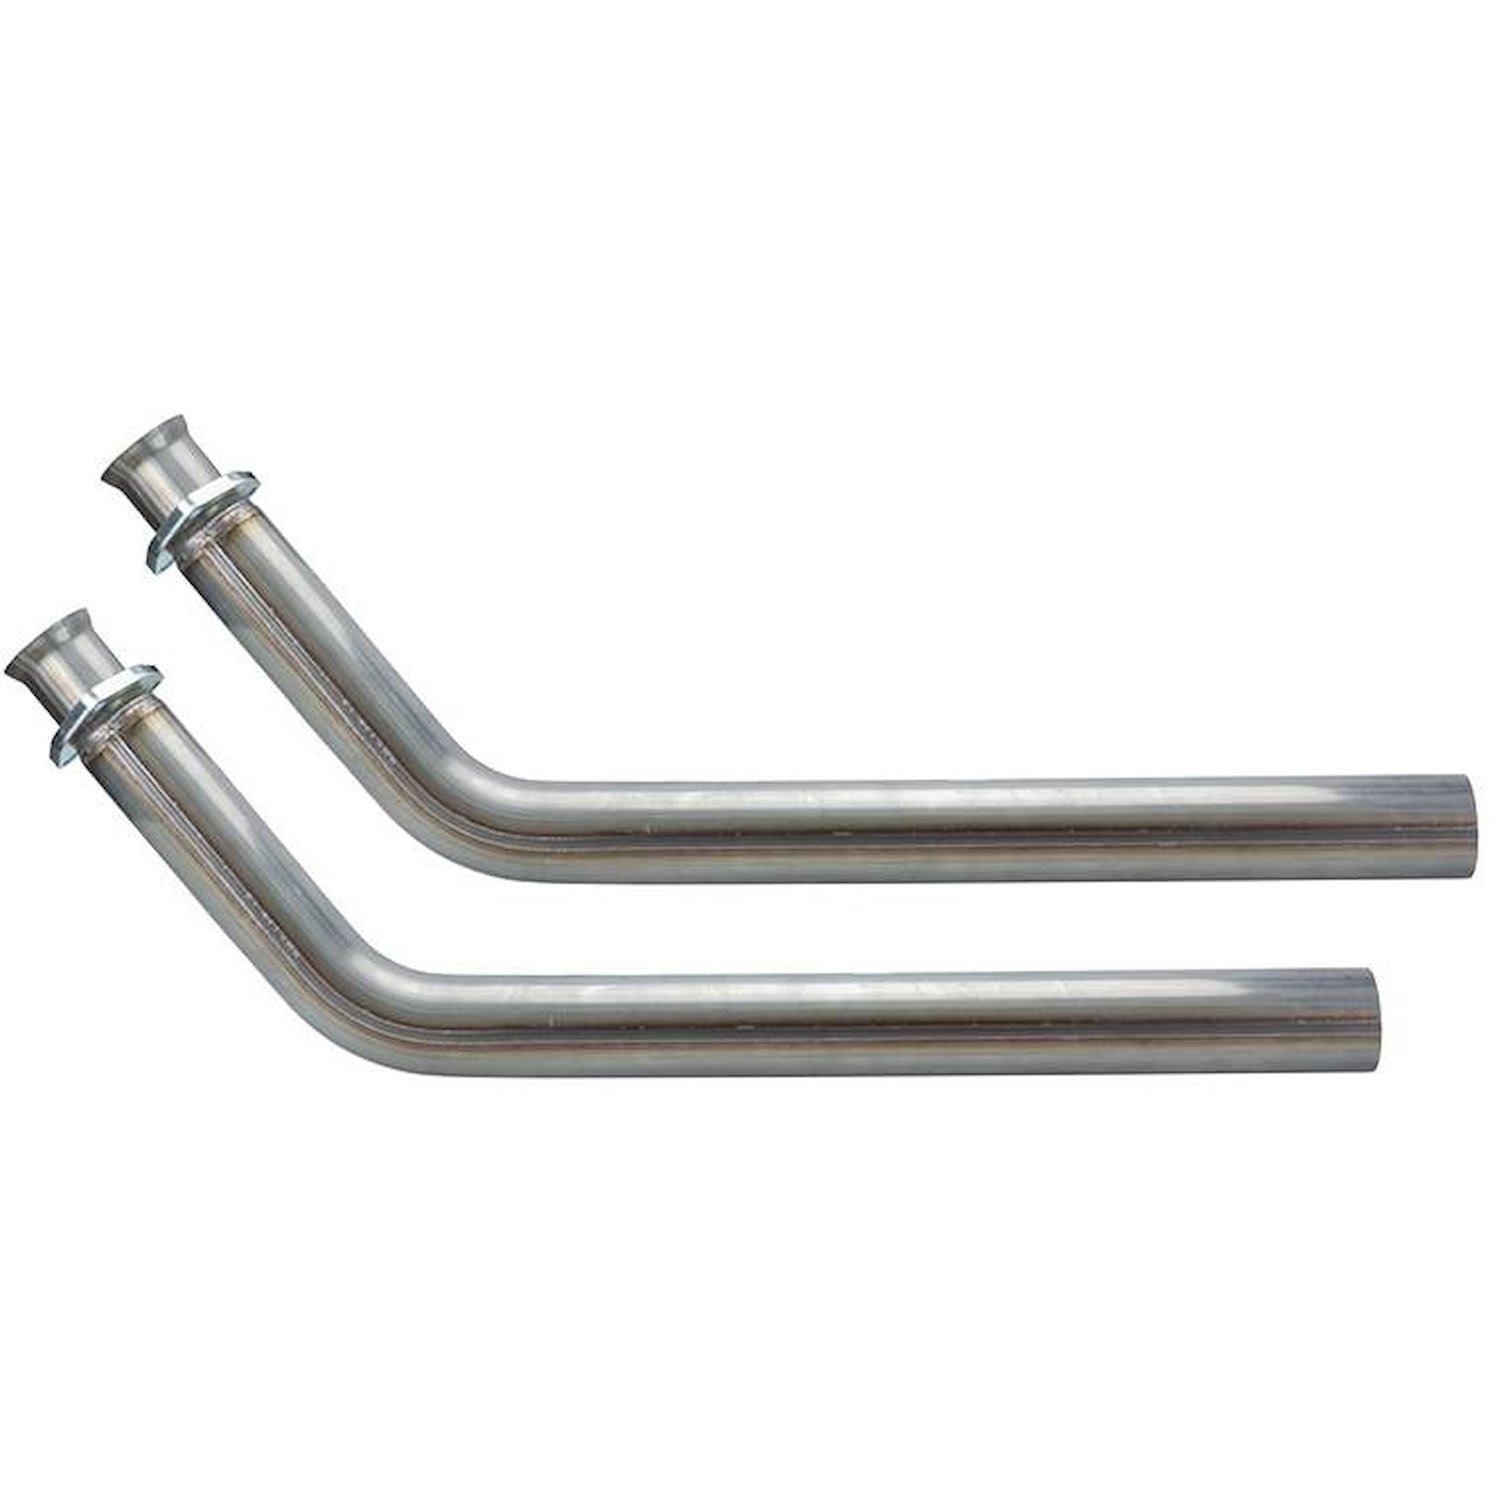 DGU16S Downpipes for 1967-1972 Chevy/GMC Truck